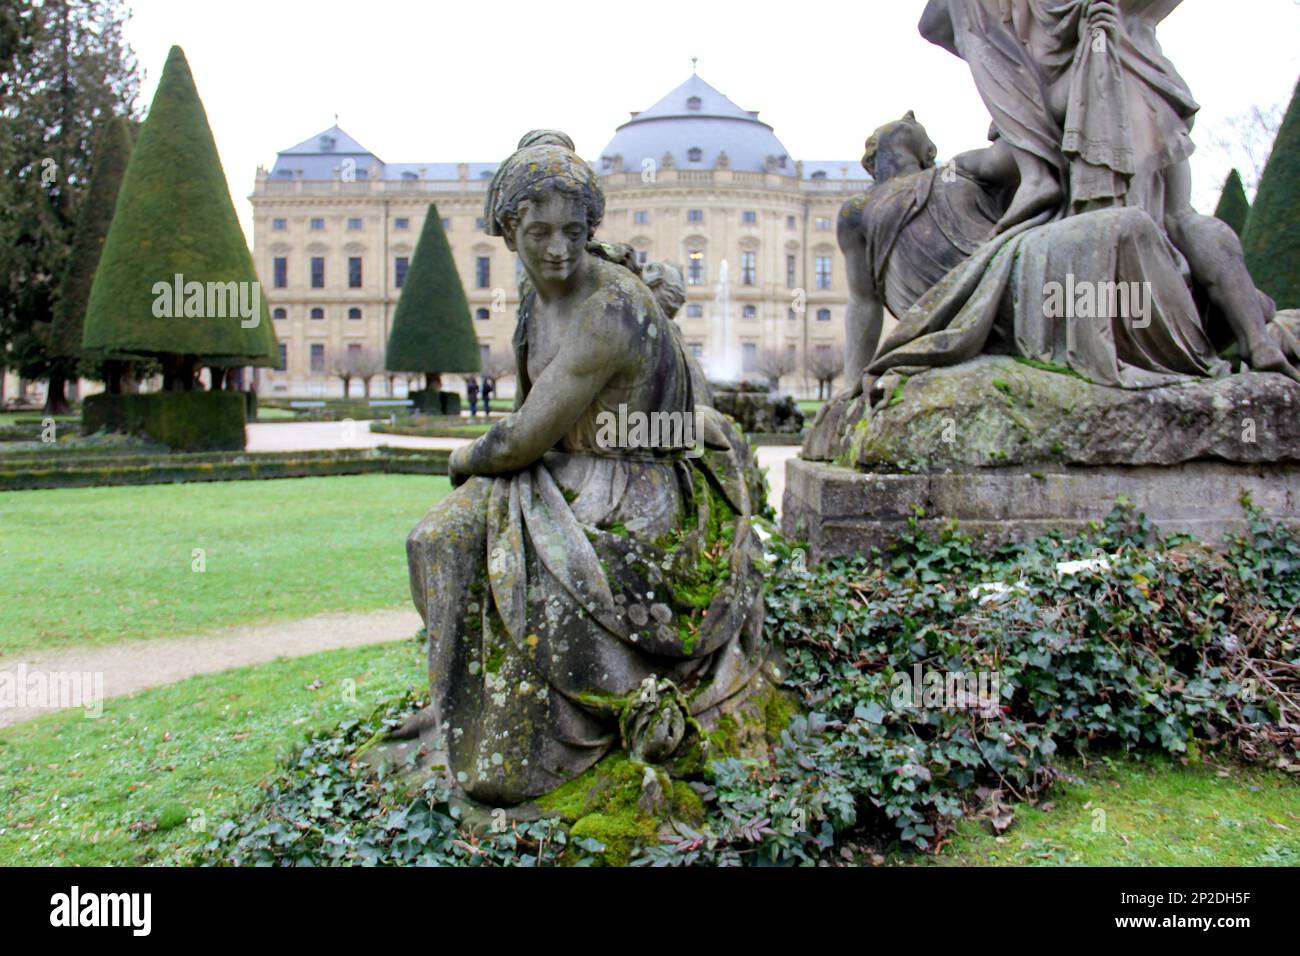 The Abduction of Proserpina, sculptural group, partial view, in the Court Gardens of the Residenz, baroque Prince-Bishops Palace, Wurzburg, Germany Stock Photo